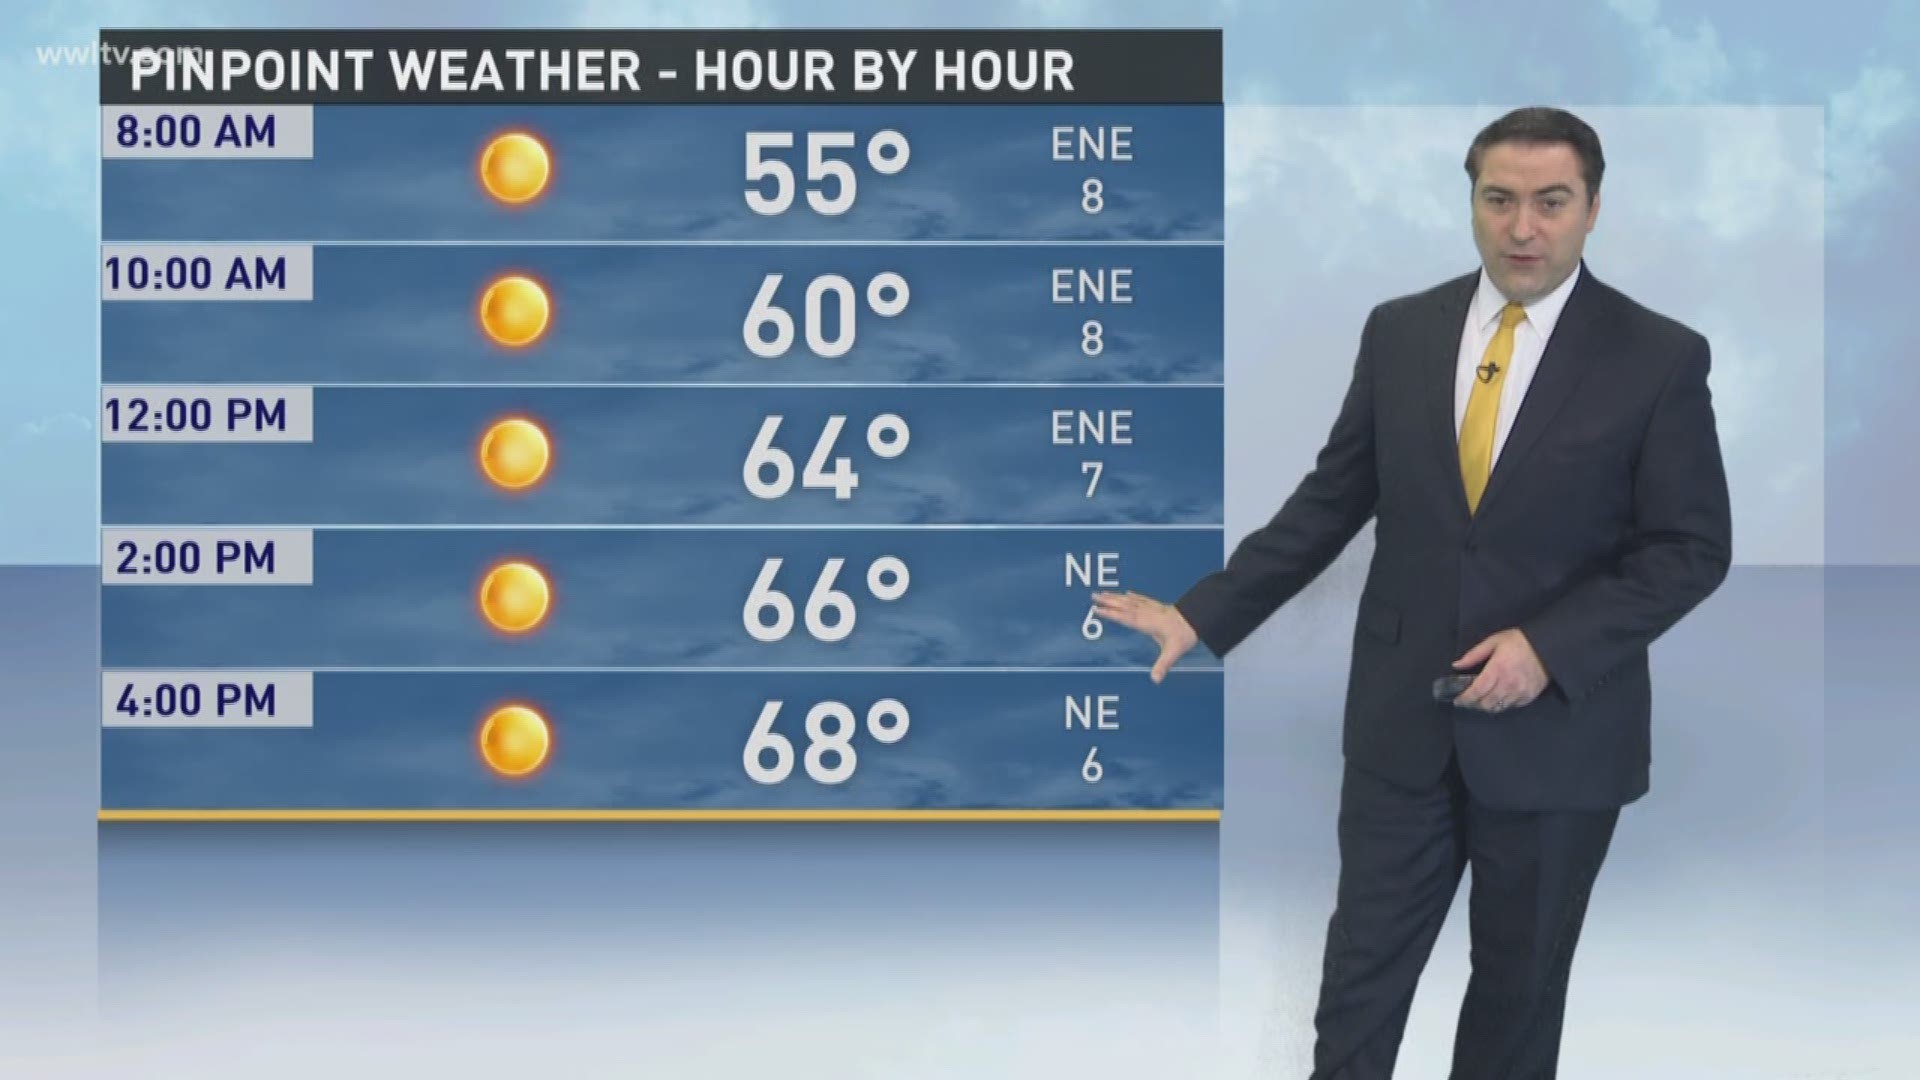 Meteorologist Dave Nussbaum says it be a gorgeous day with plenty of sun and mild temperatures. 